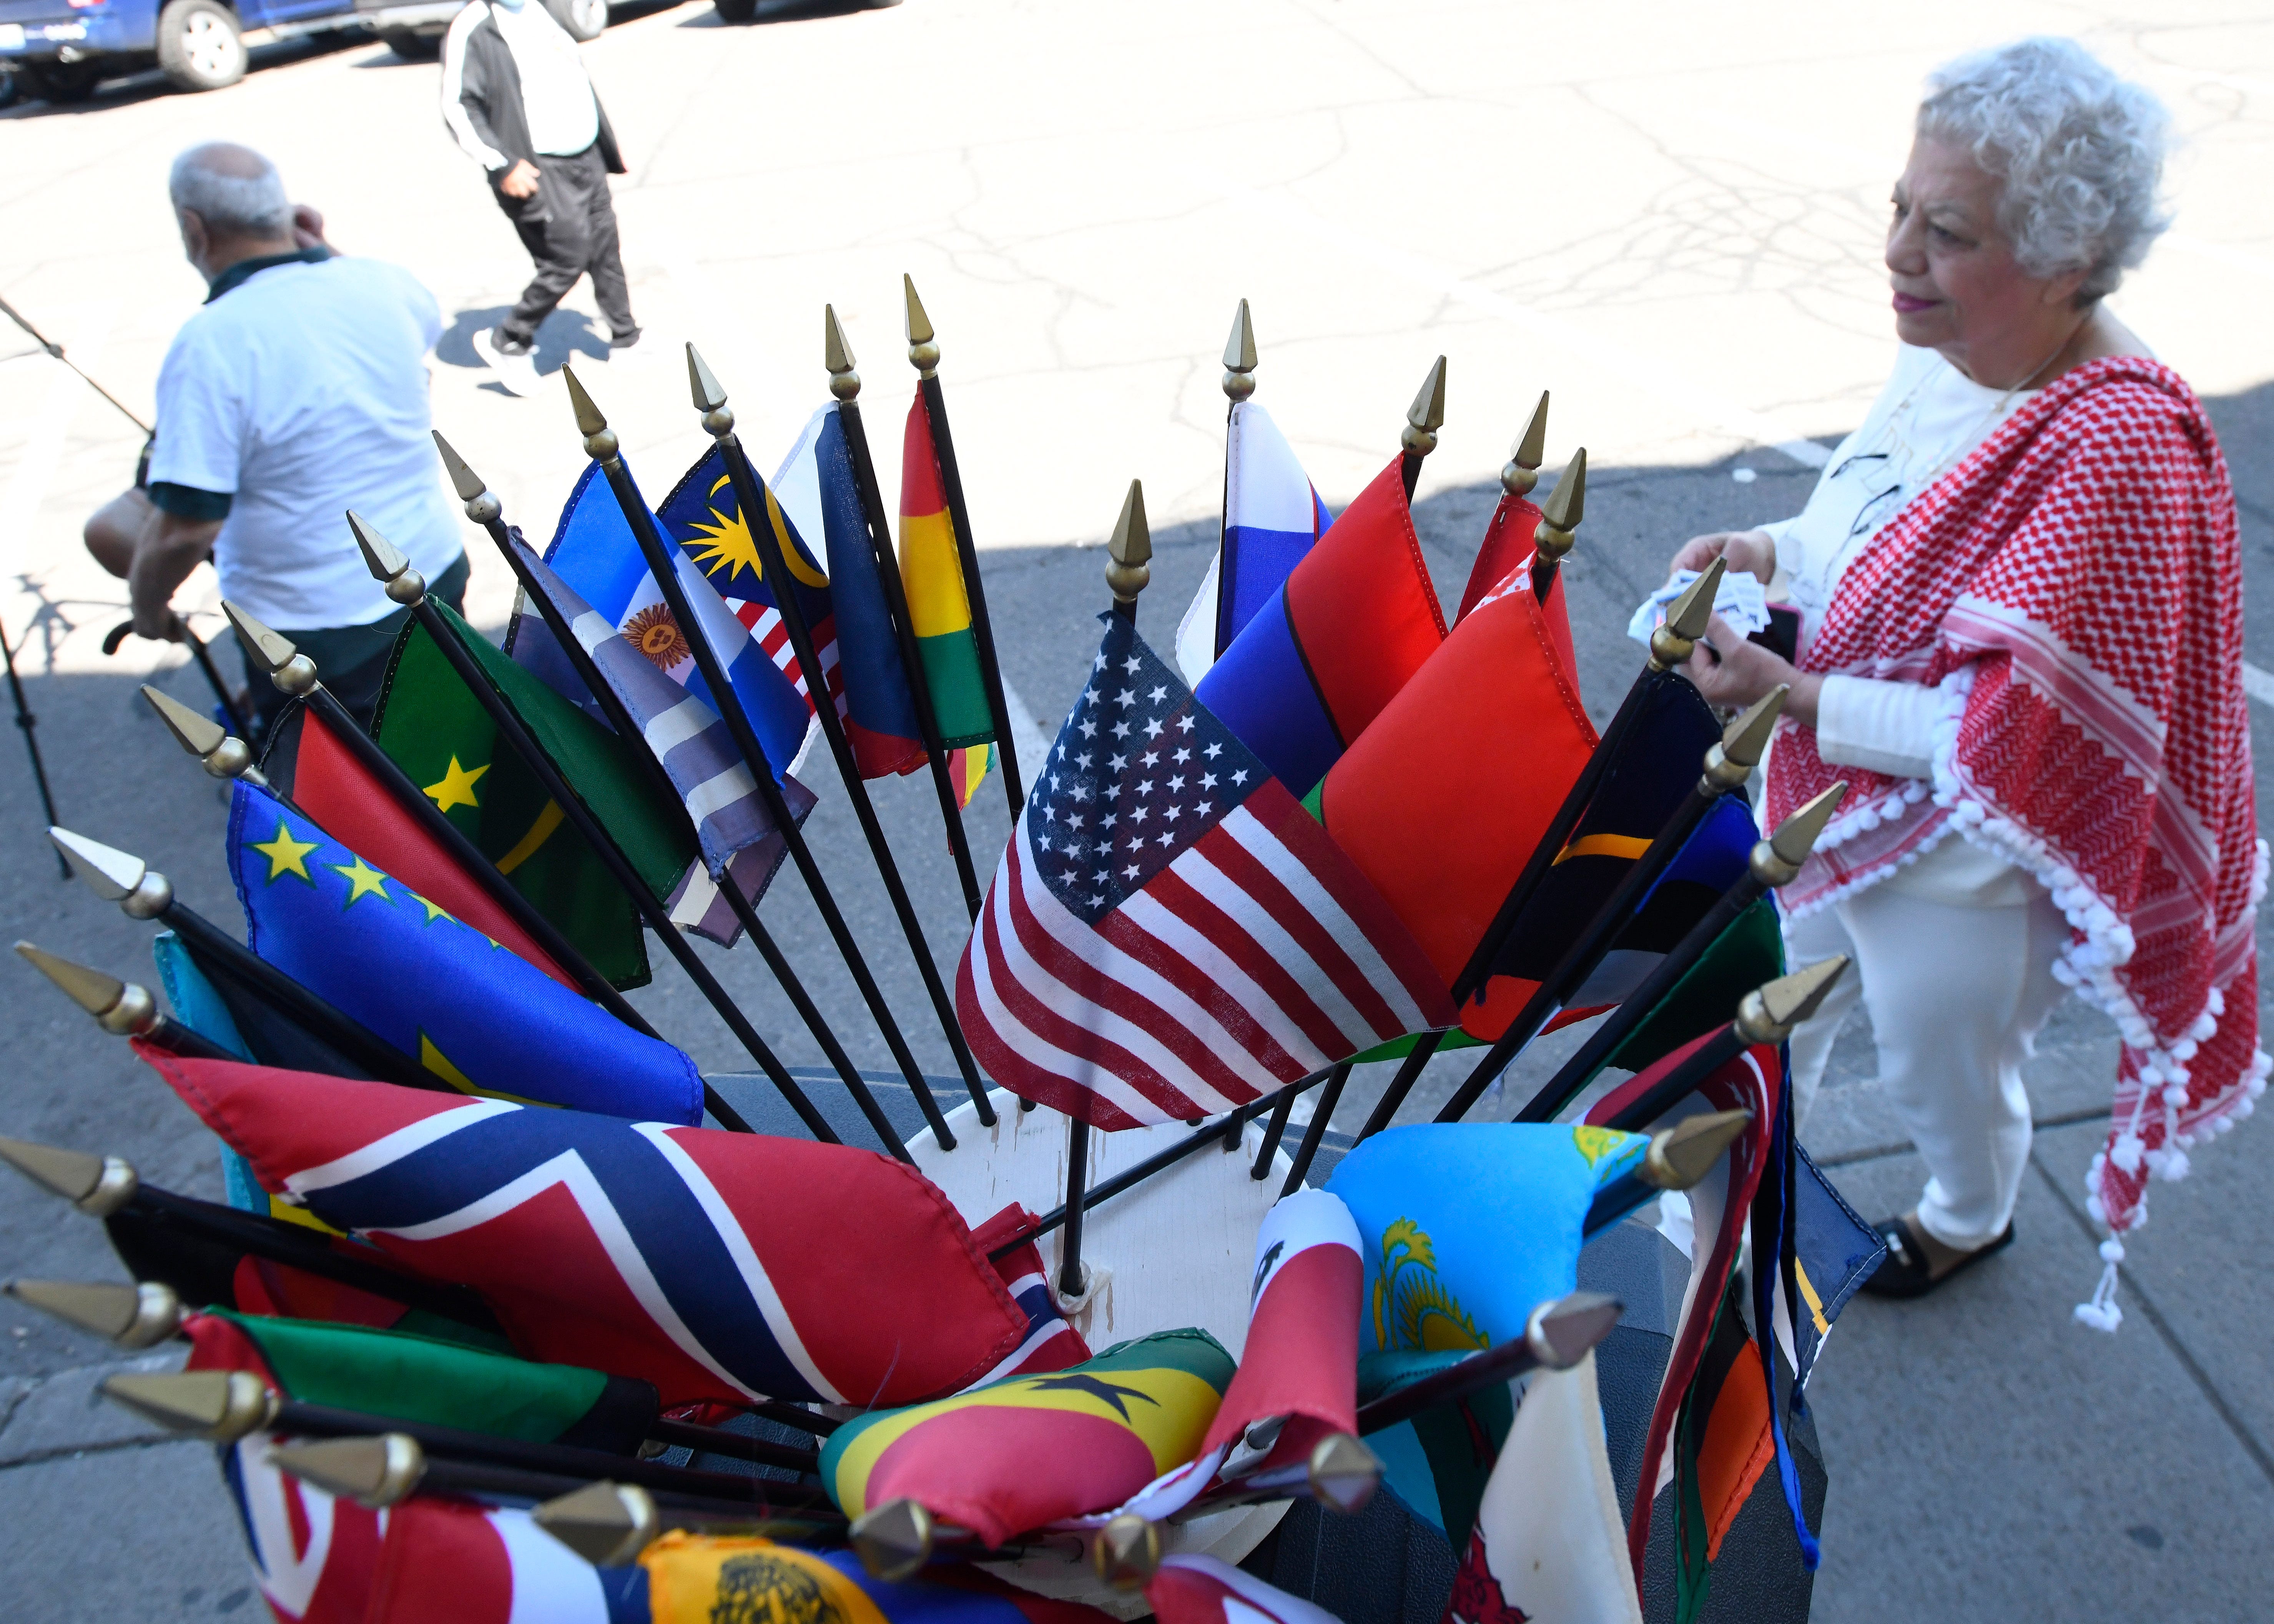 Nada Dalgamouni, global education director of the International Institute of Metropolitan Detroit, Inc. brings a bouquet of flags to a press conference at the AMS Mosque in Dearborn, "The flags represent to you, that the whole world is saying the same thing, enough is enough."